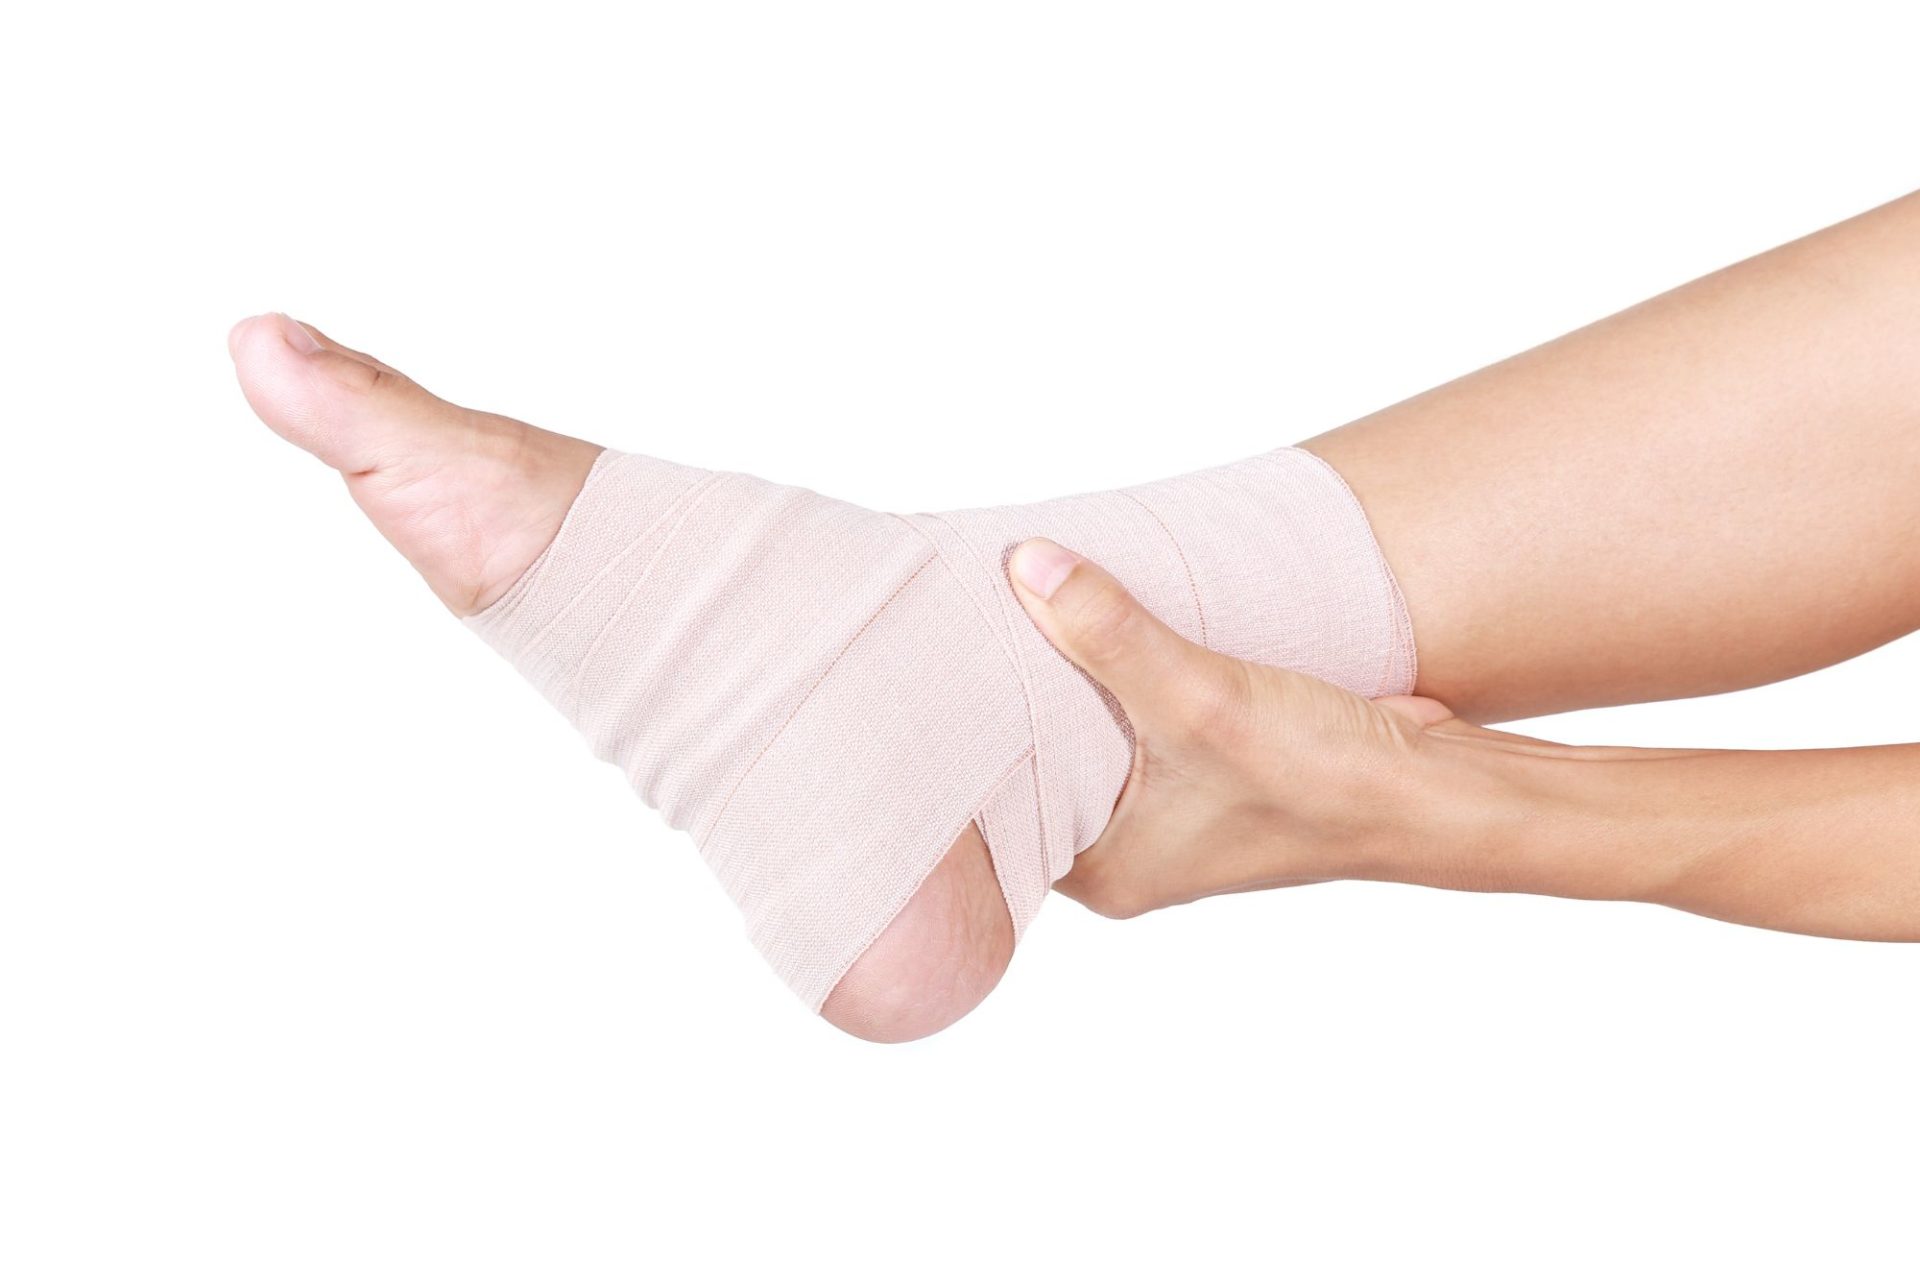 Sprained Ankle vs. Broken Ankle: How to Diagnose and Treat Each